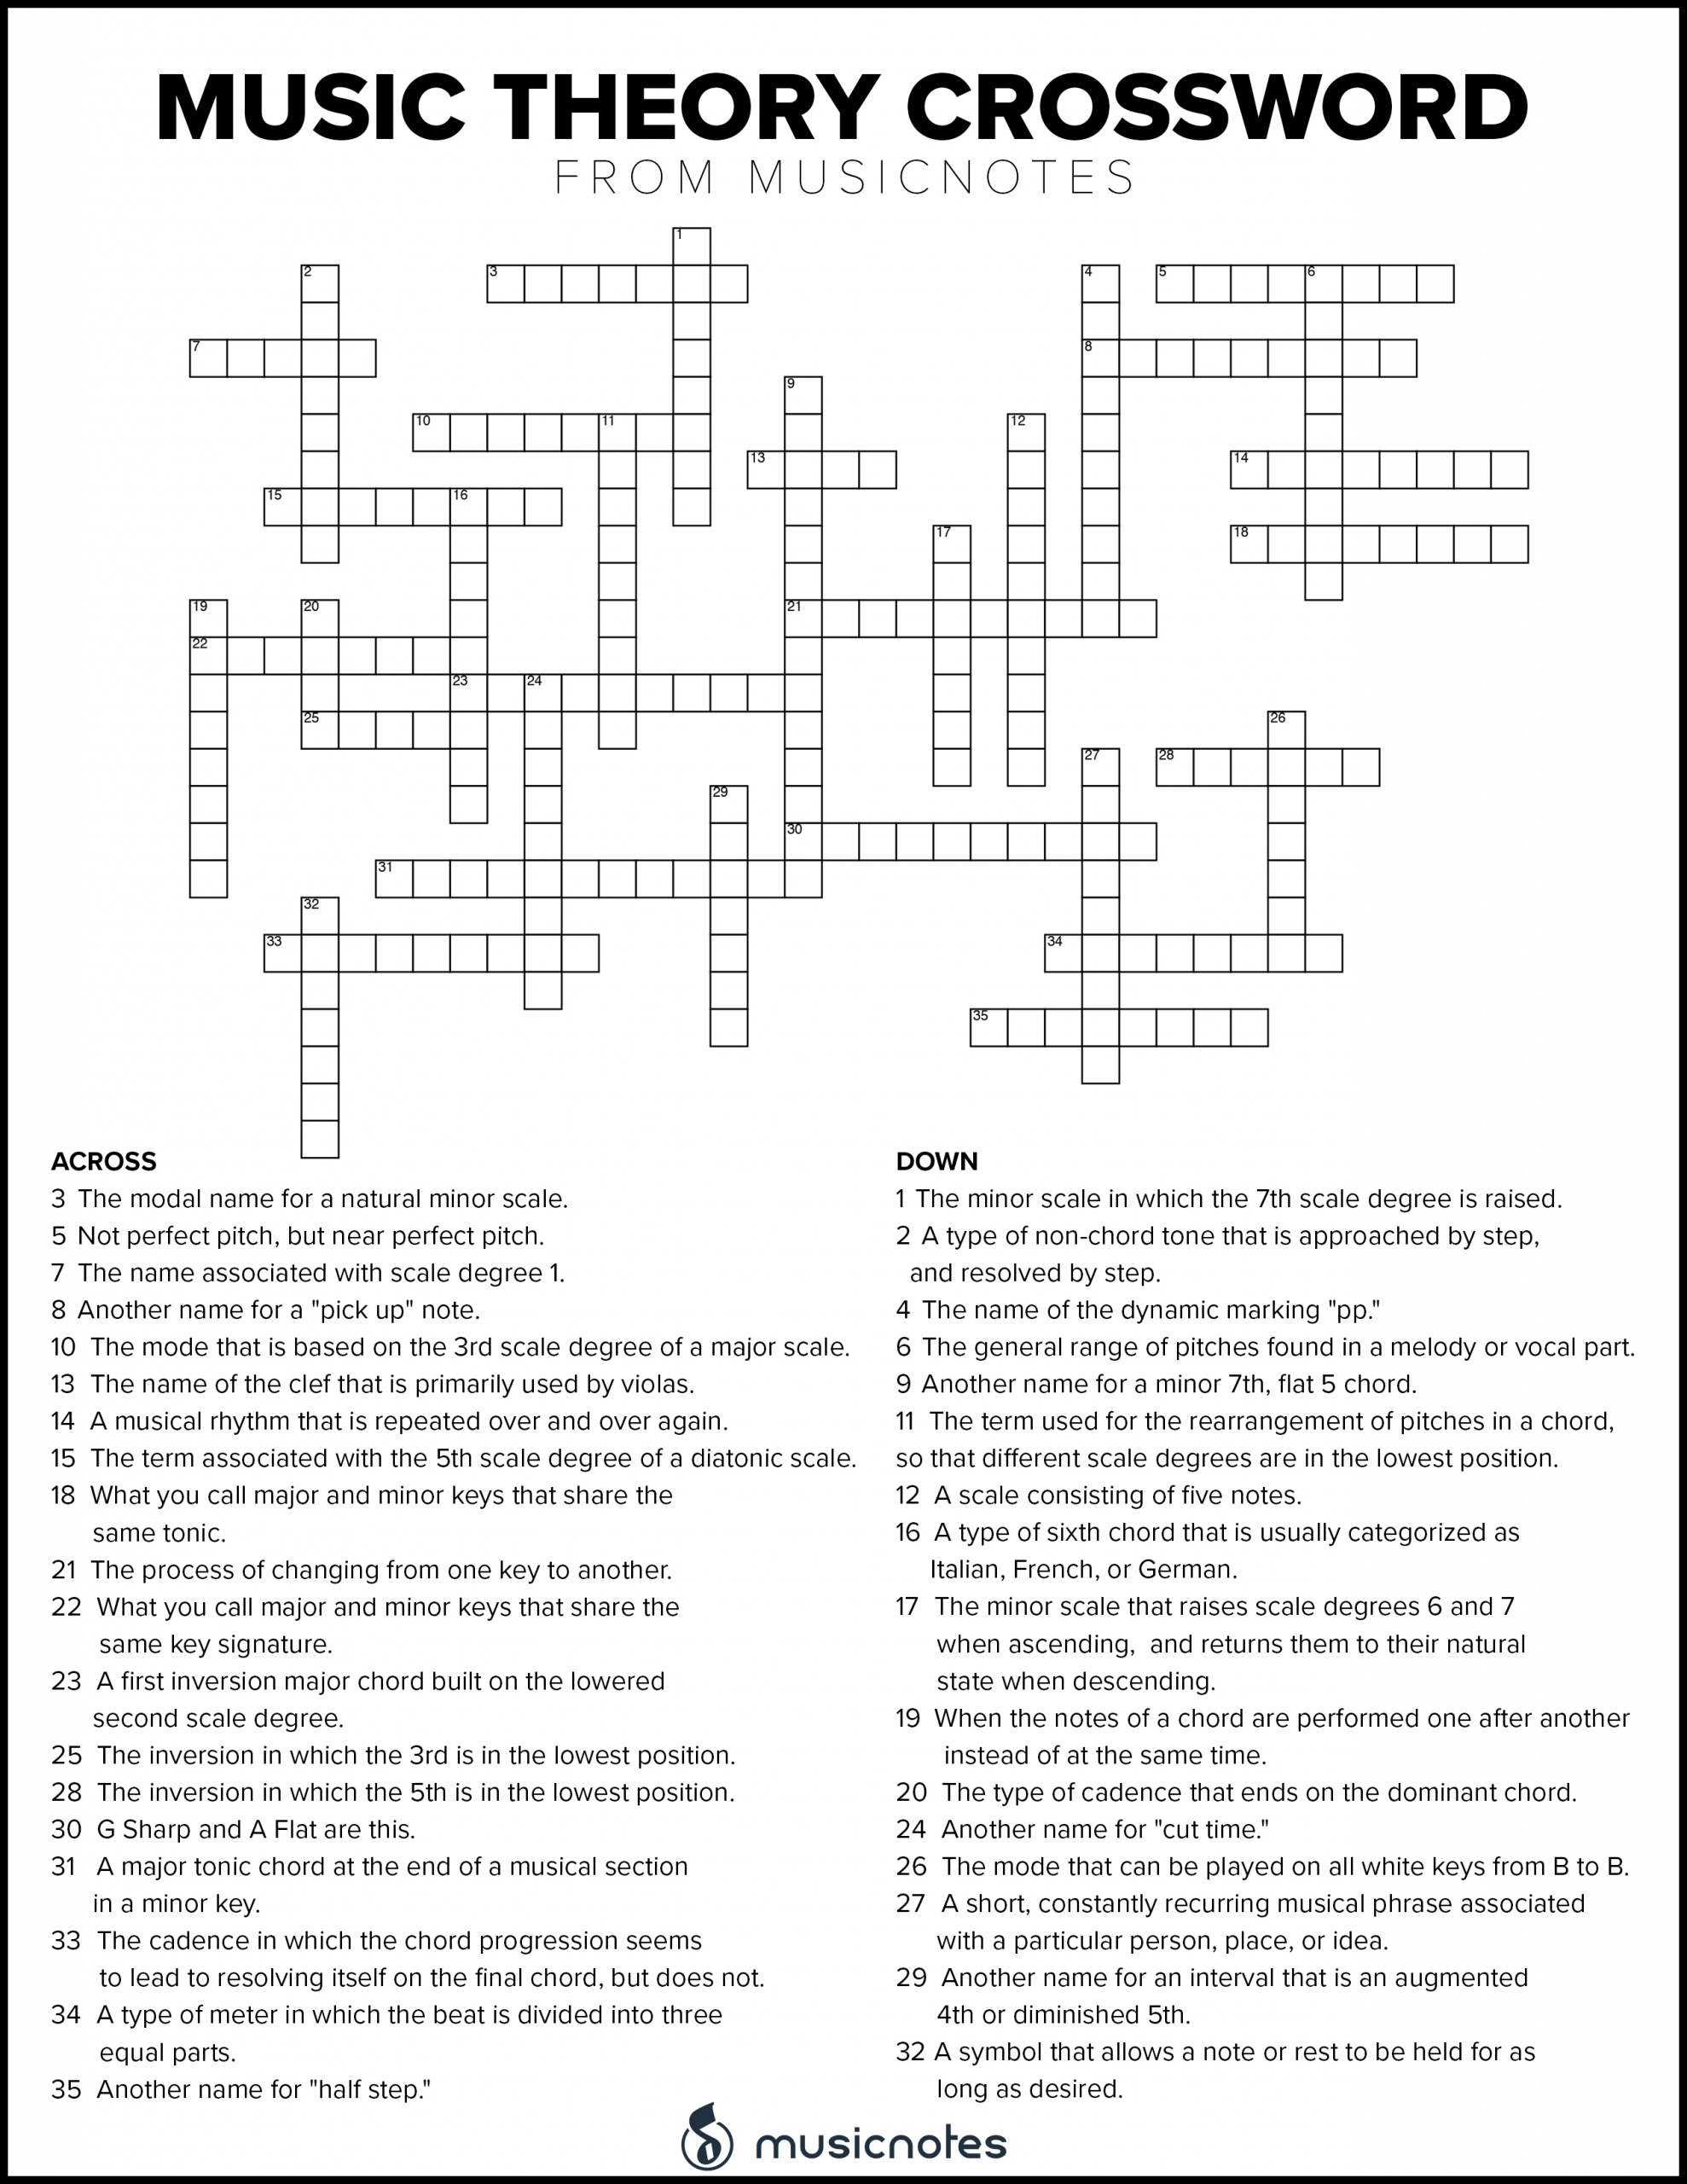 Musical Crossword Puzzles With Free Printables! — Musicnotes Now